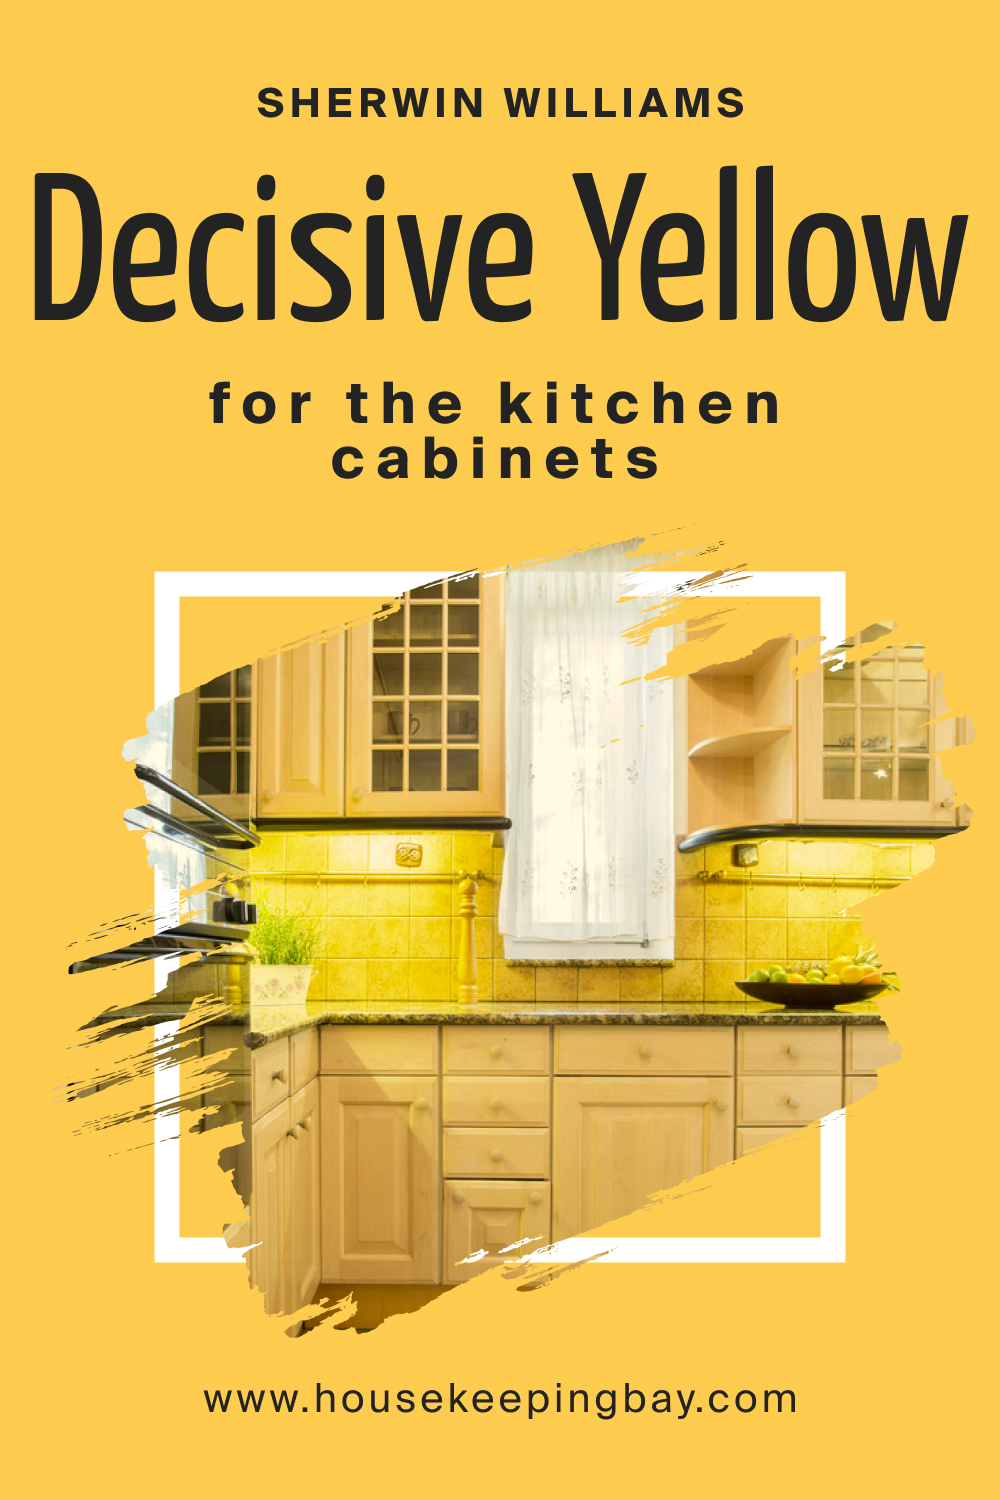 Sherwin Williams. Decisive Yellow SW 6902 For the Kitchen Cabinets